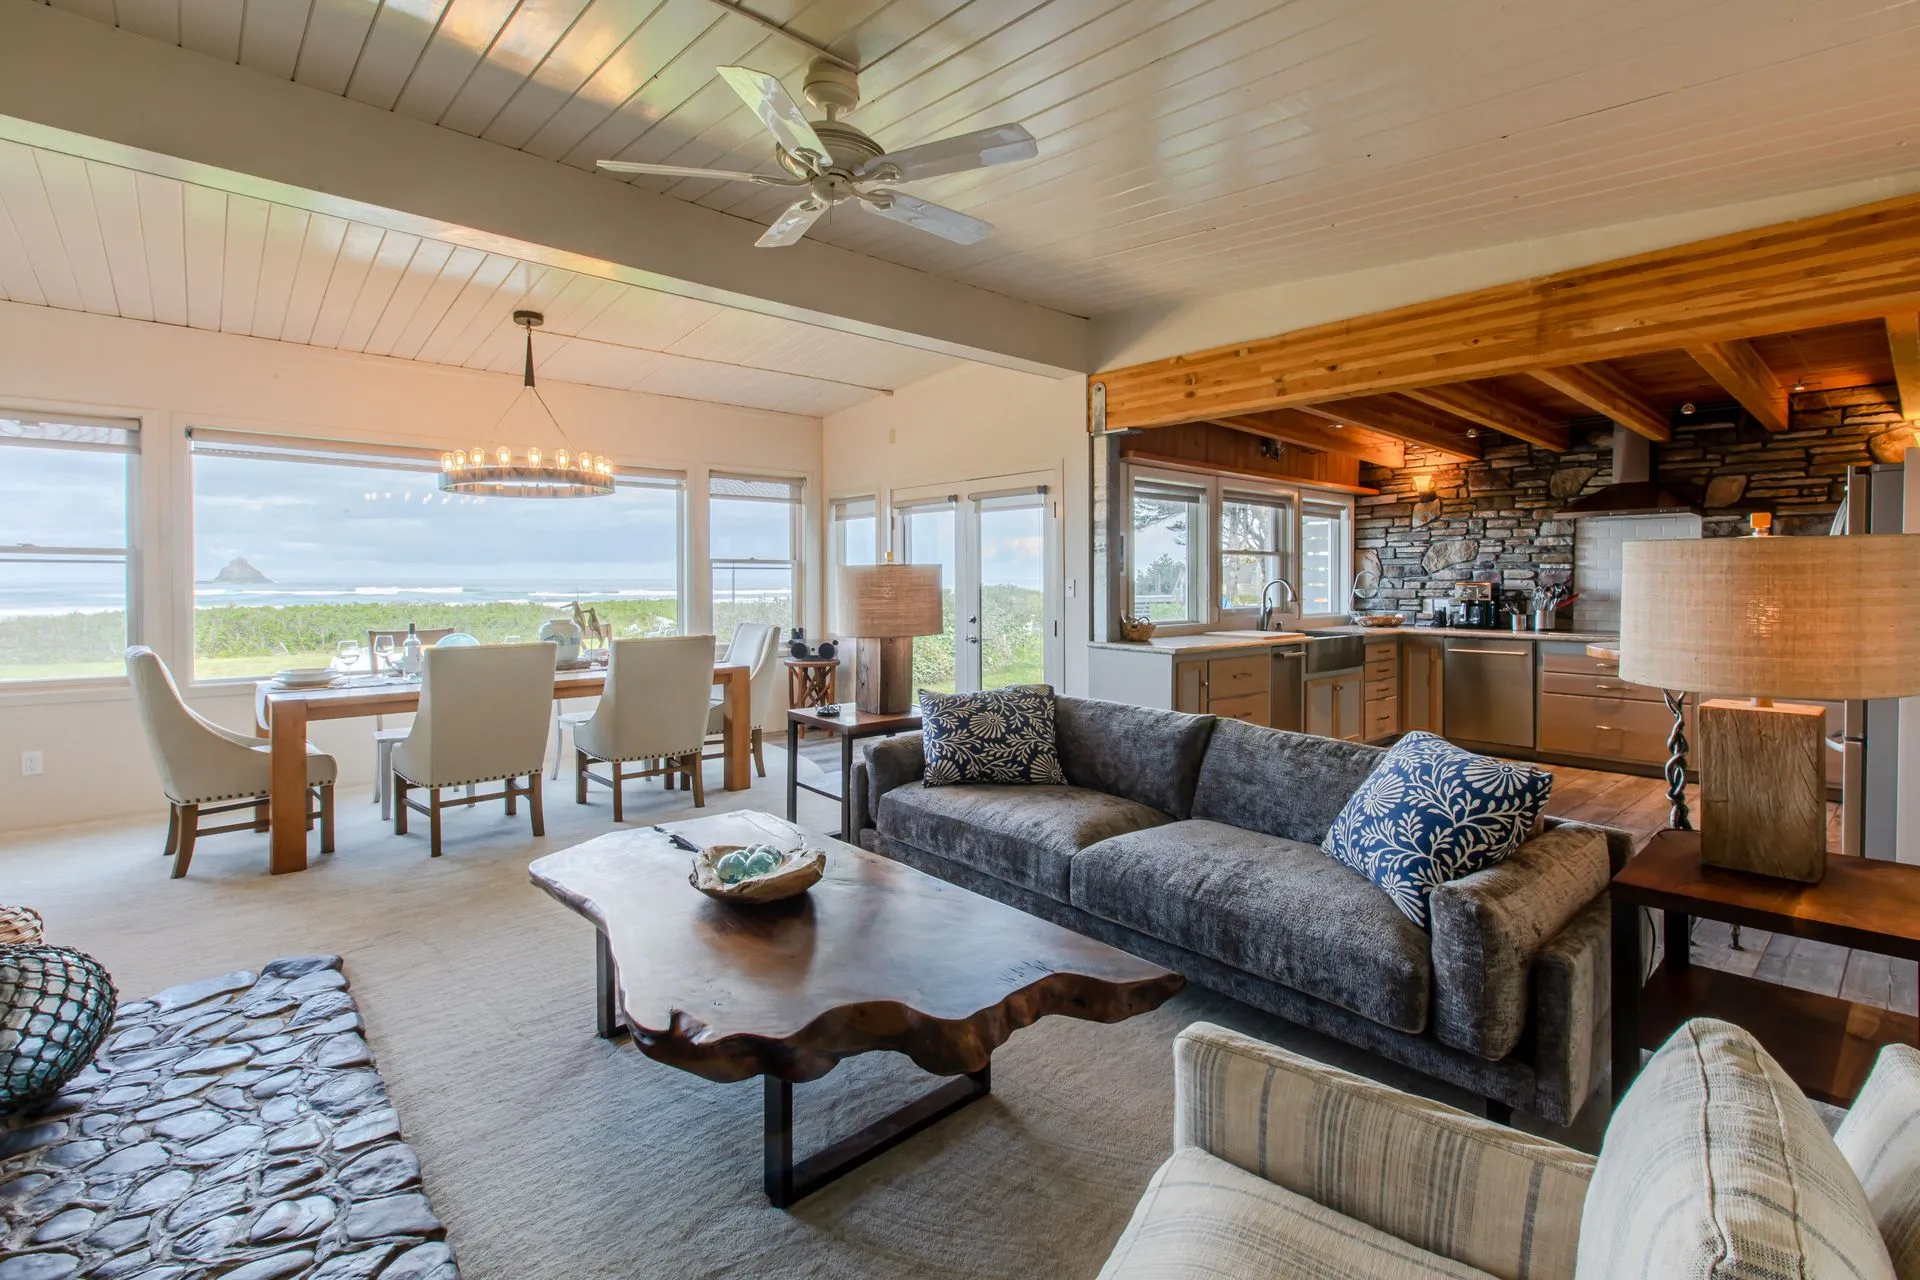 Vacation Rental in Cannon Beach, Sona Tra living space with couch, dining table and view of kitchen